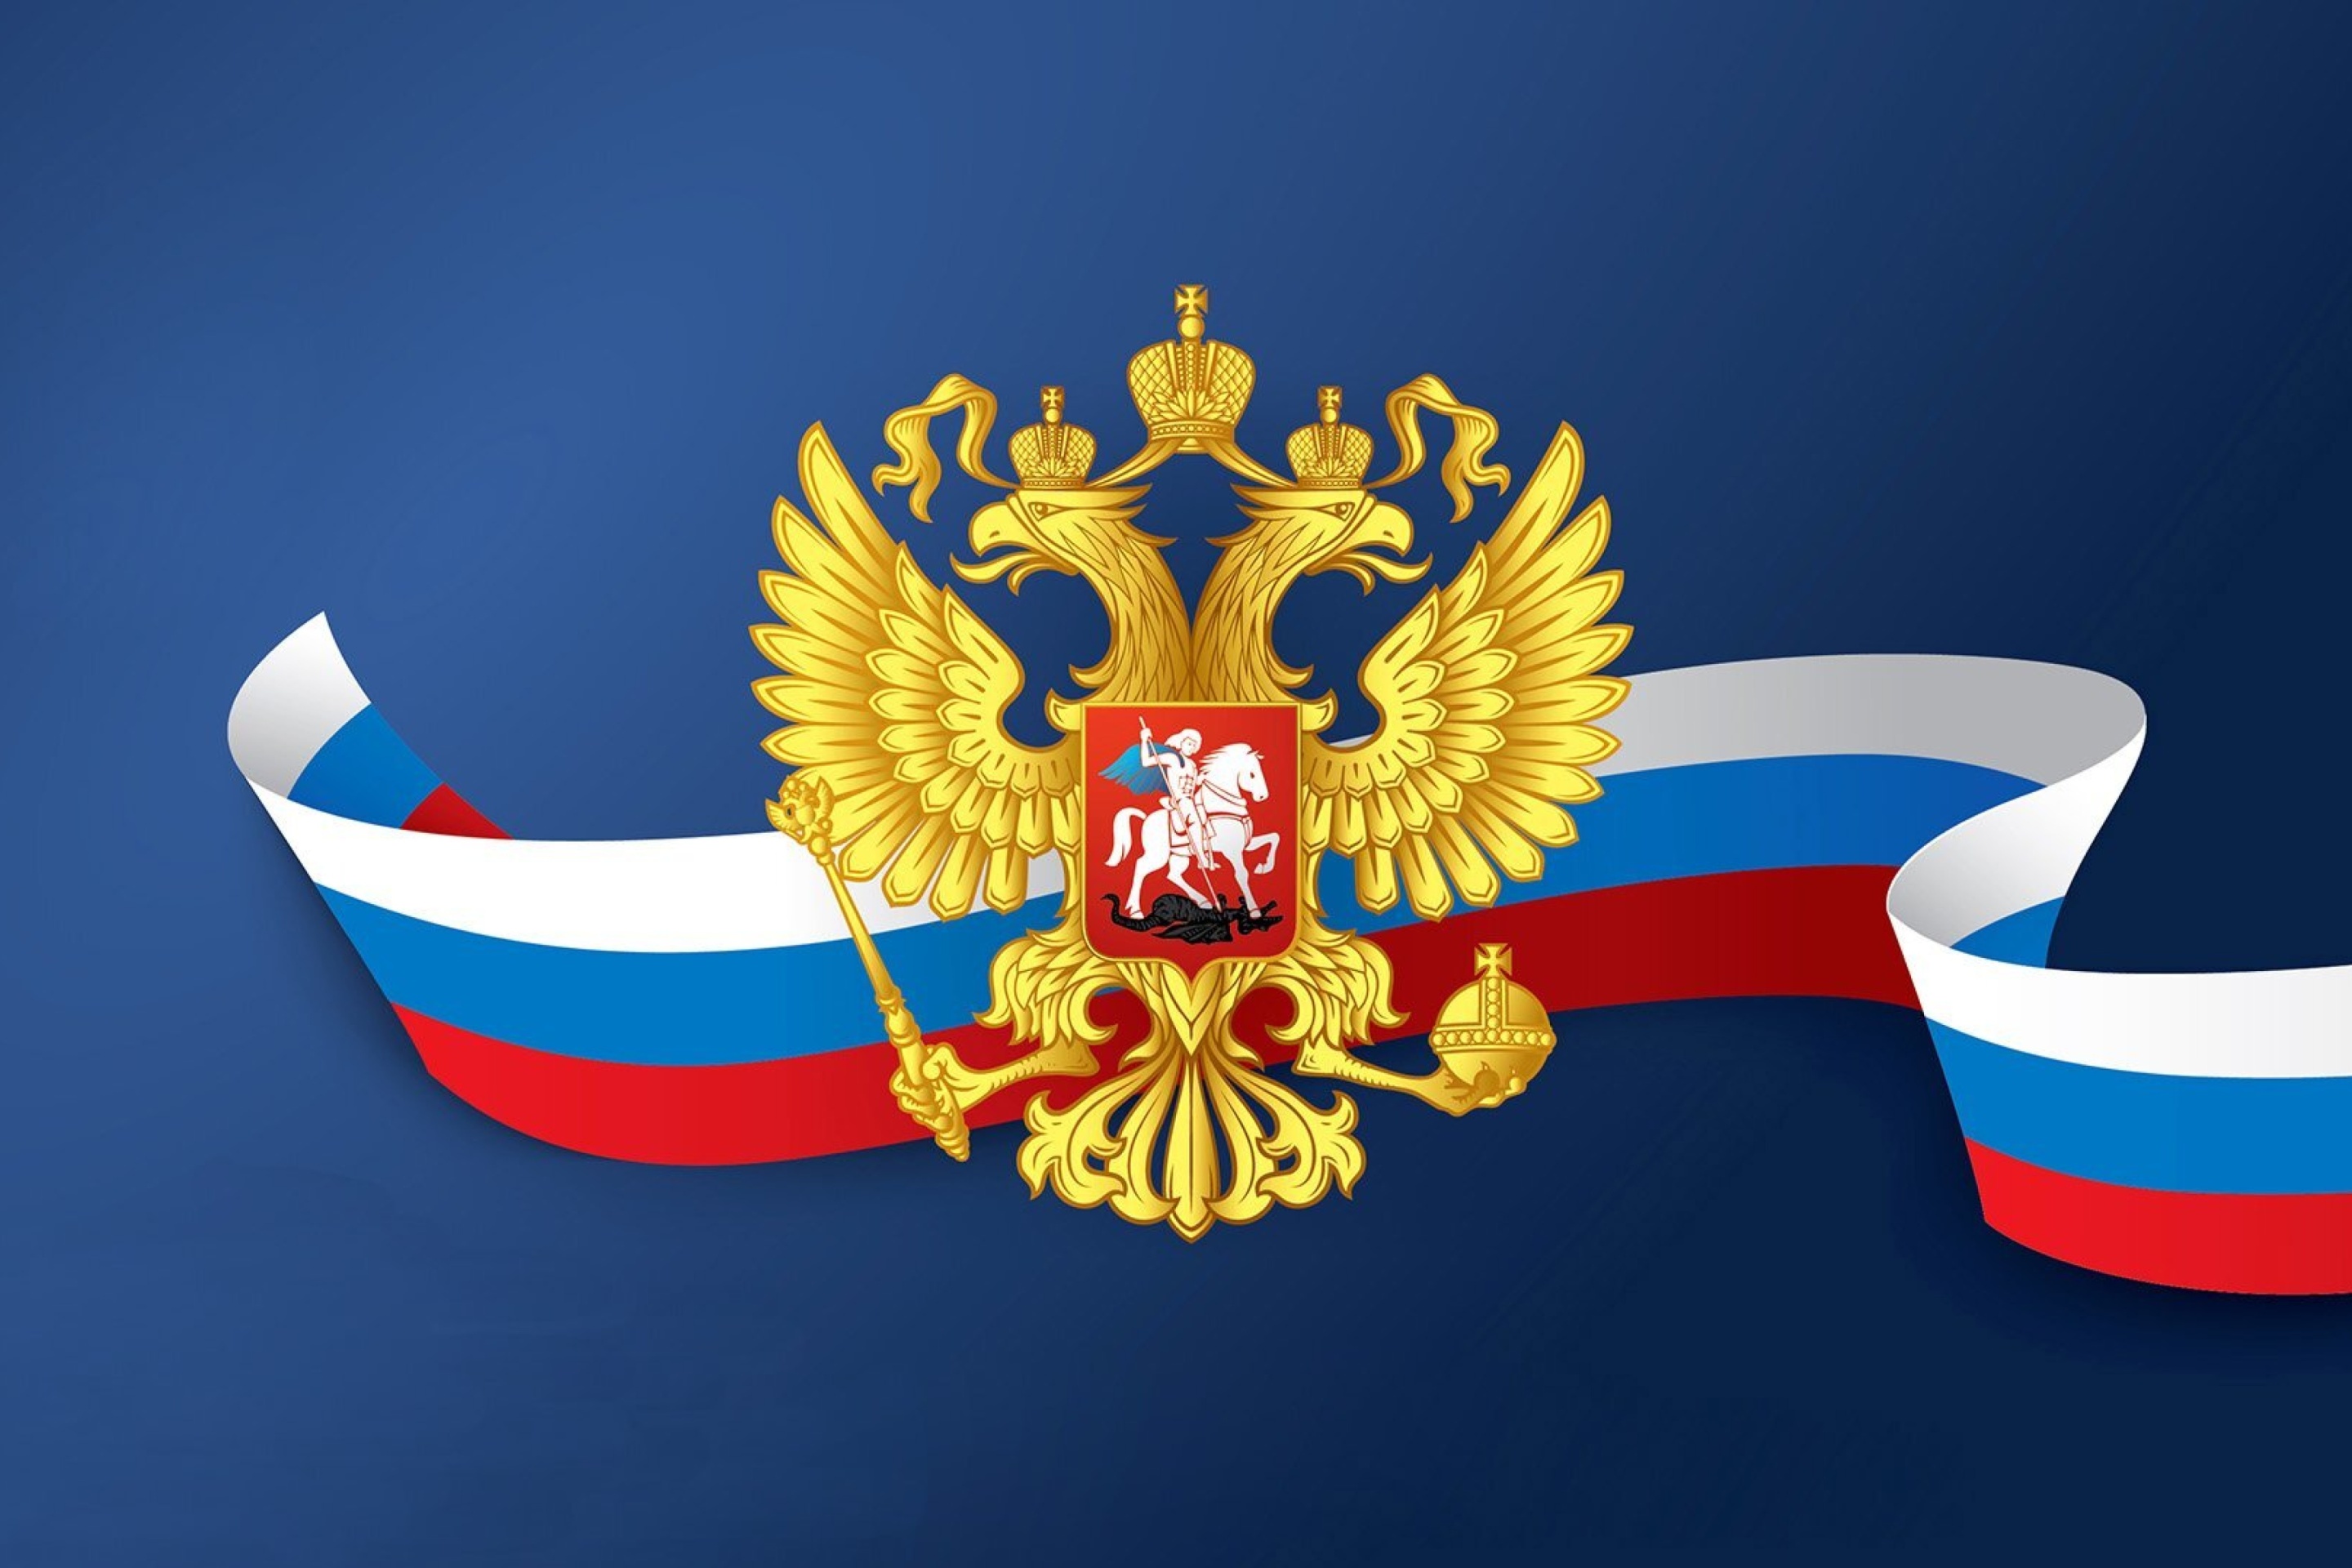 Russian coat of arms and flag screenshot #1 2880x1920